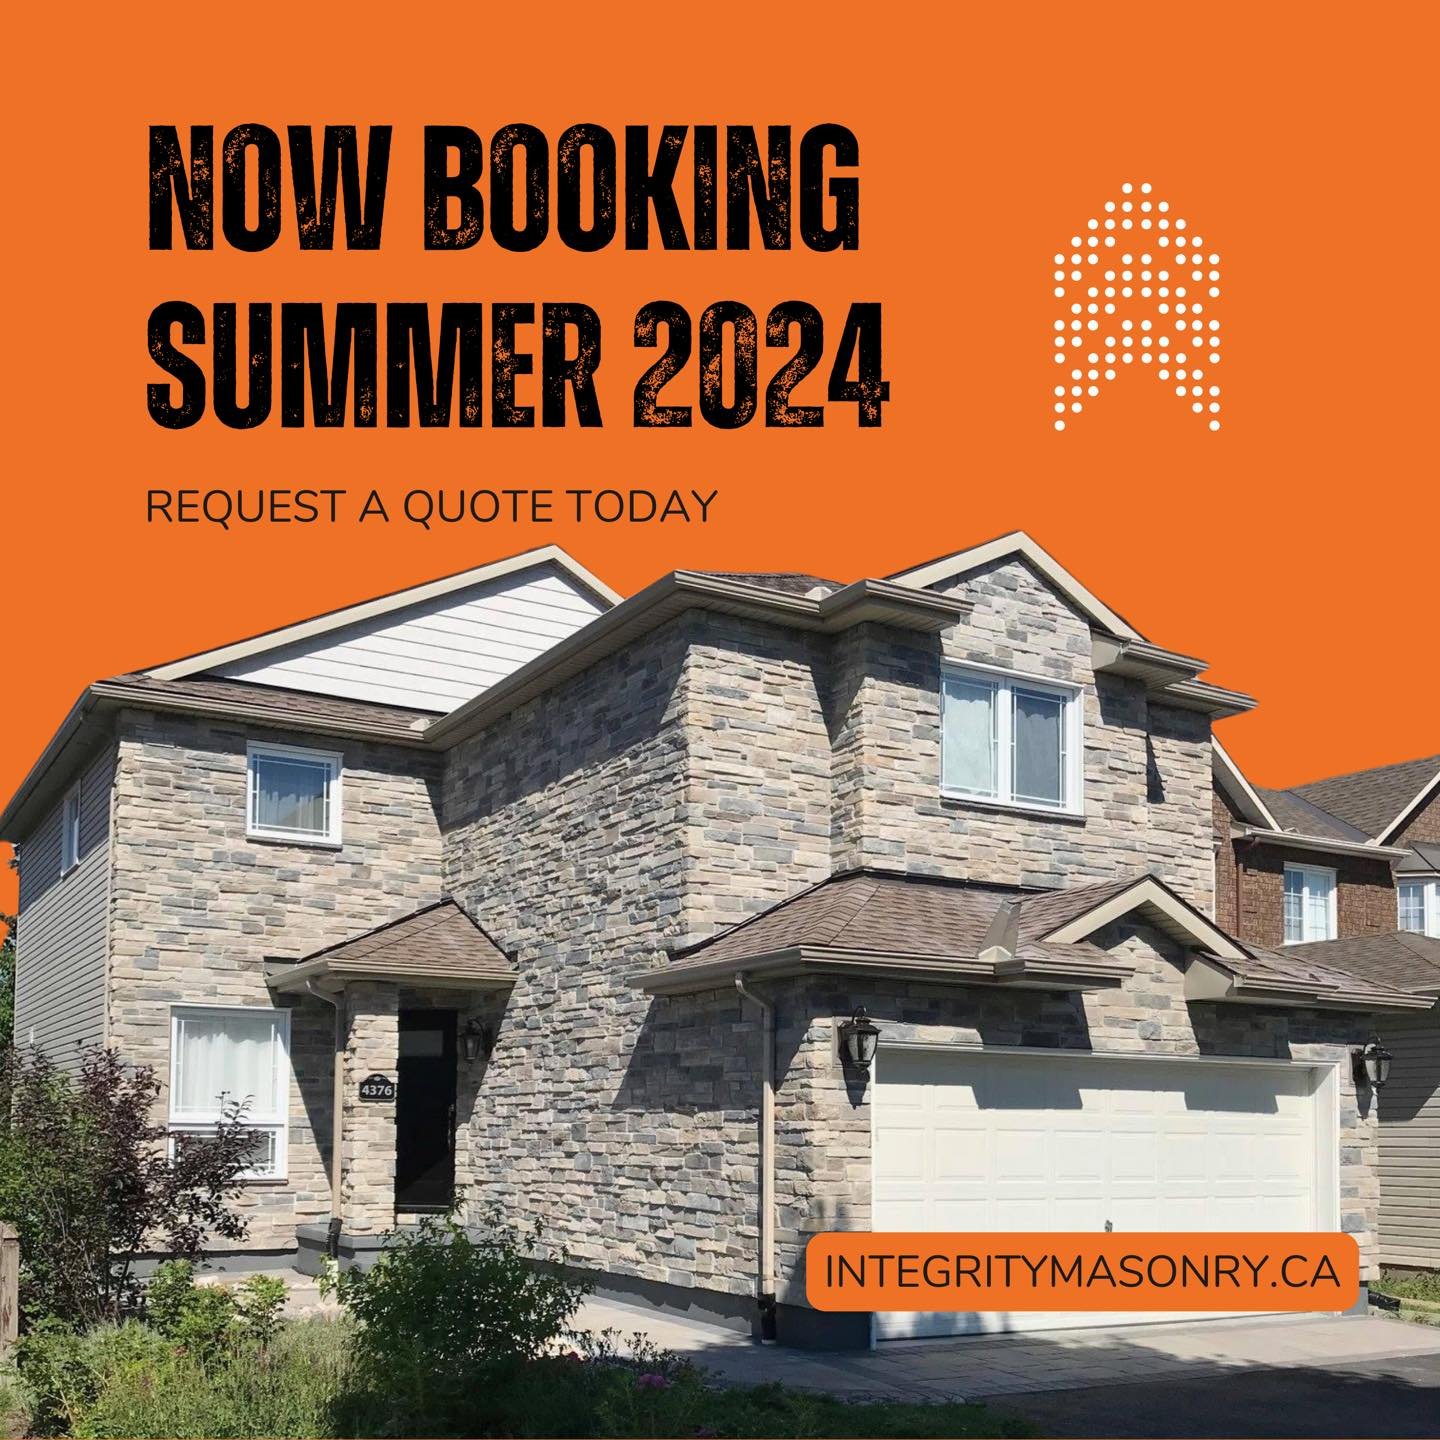 Secure your spot on our summer schedule now by requesting a quote at integritymasonry.ca. 📆🧱

#masonry #masonryottawa #ottawacontractor #chimney #brickwork #stonework #restoration #repairs #newconstruction #apprenticeships #stonepointing #heritagem